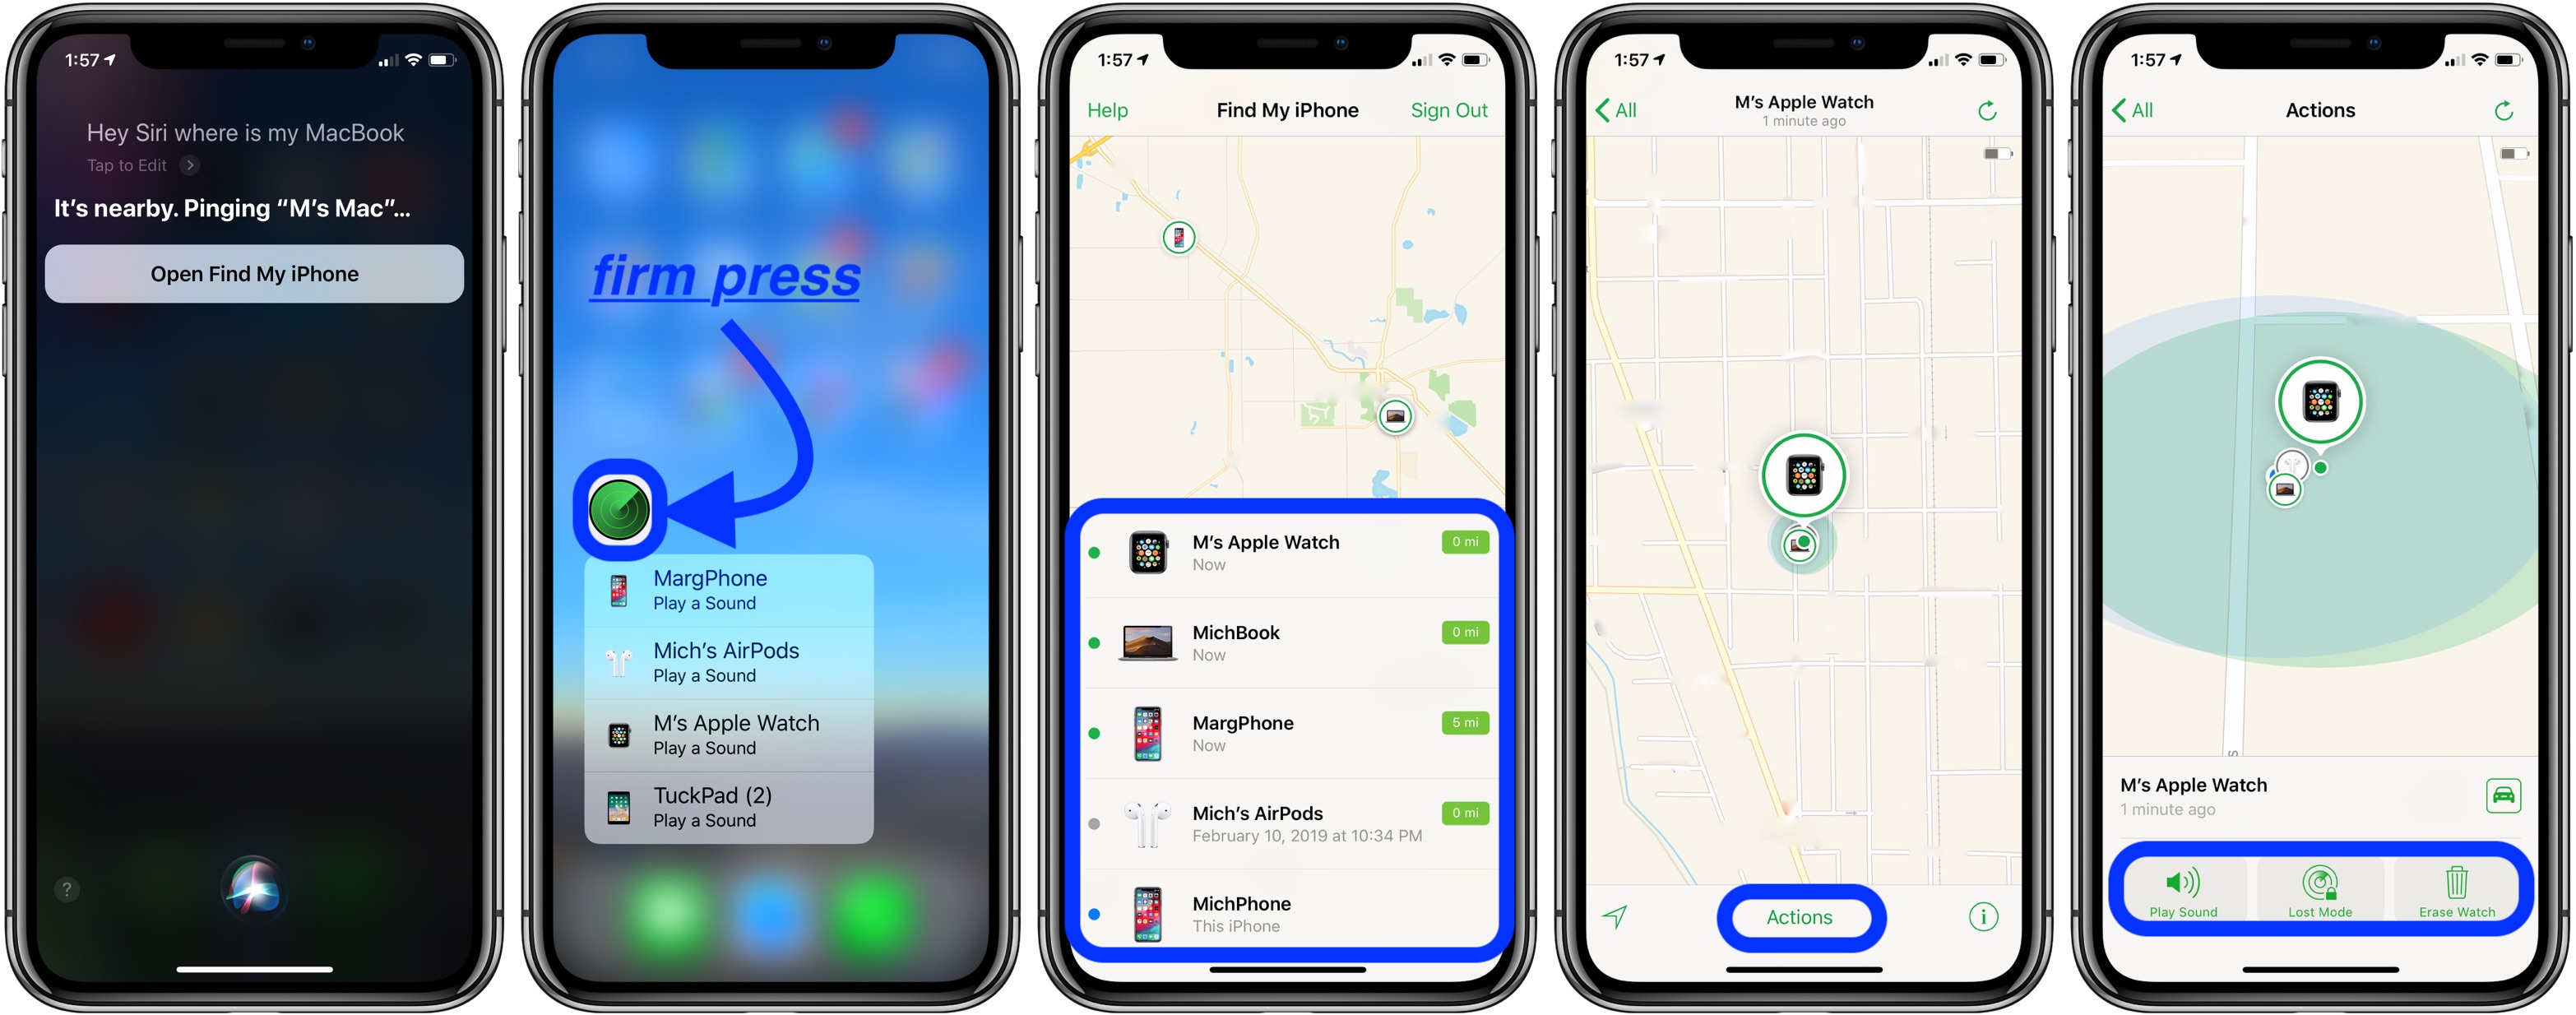 set up and use Find My iPhone walkthrough